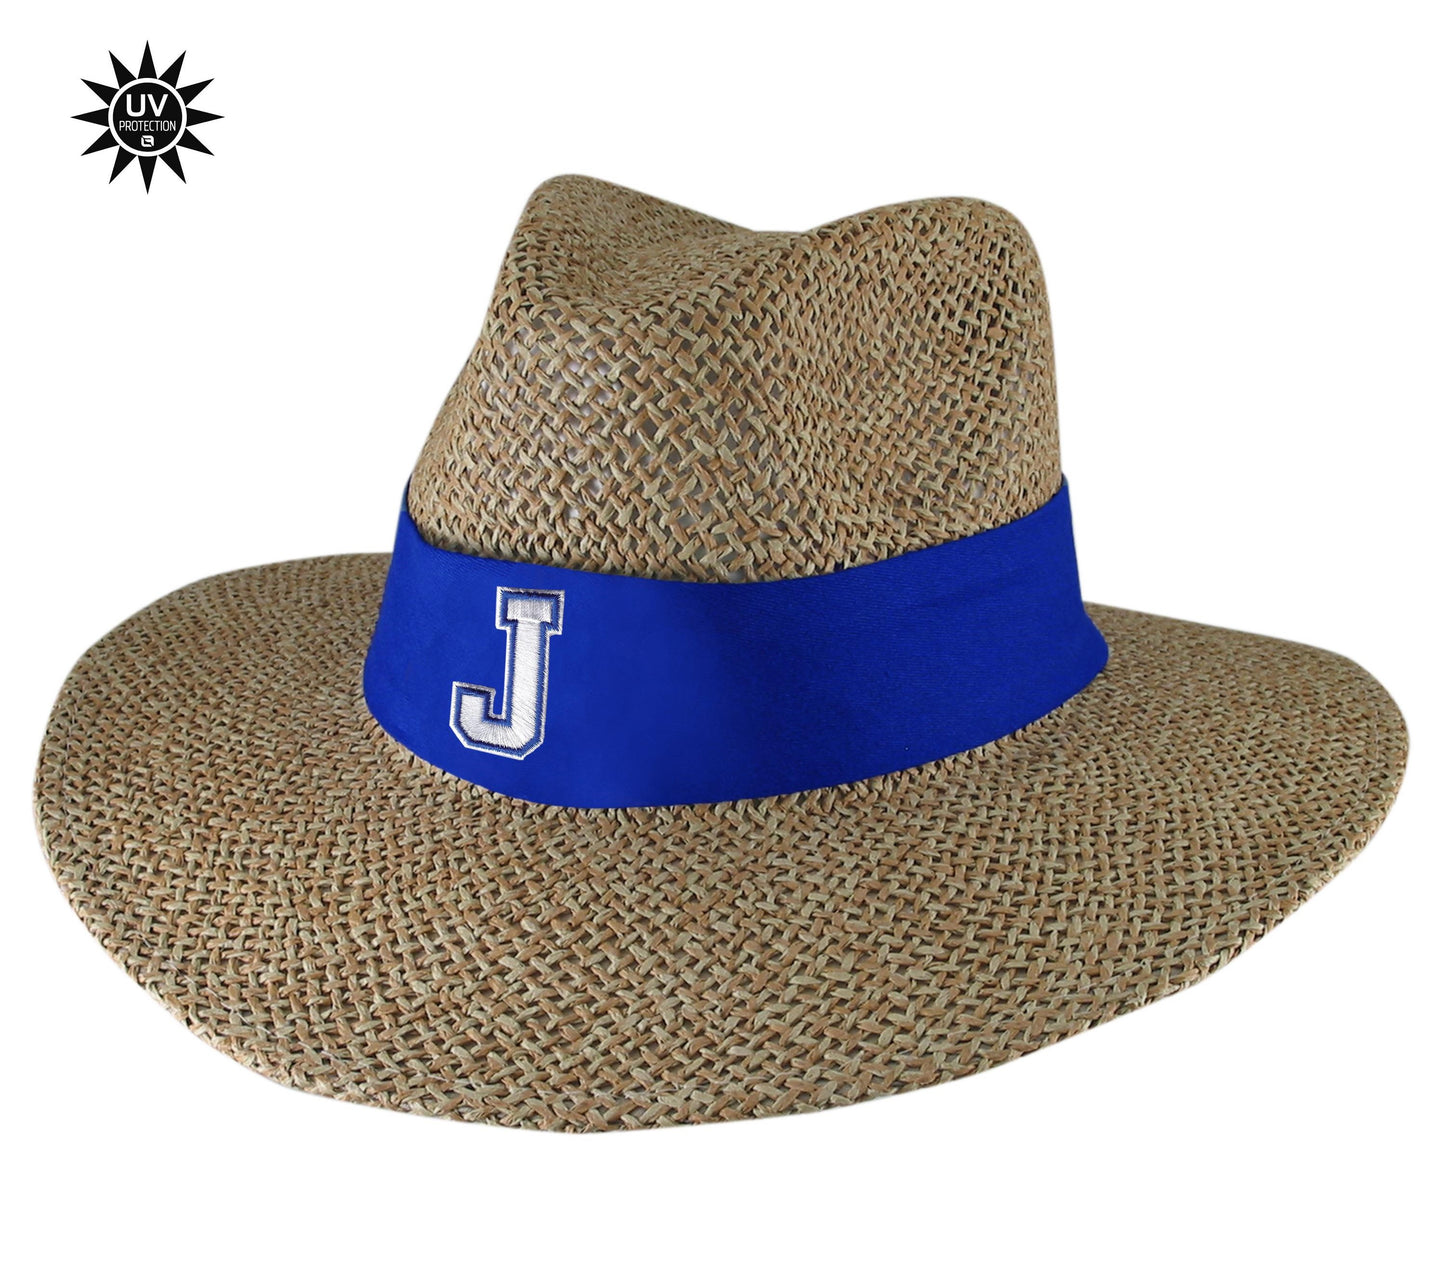 Logo Fit. UPF. Safari hat with sunblock lining and flex-fit band. Natural color straw. One size fits most. Royal blue band with J logo